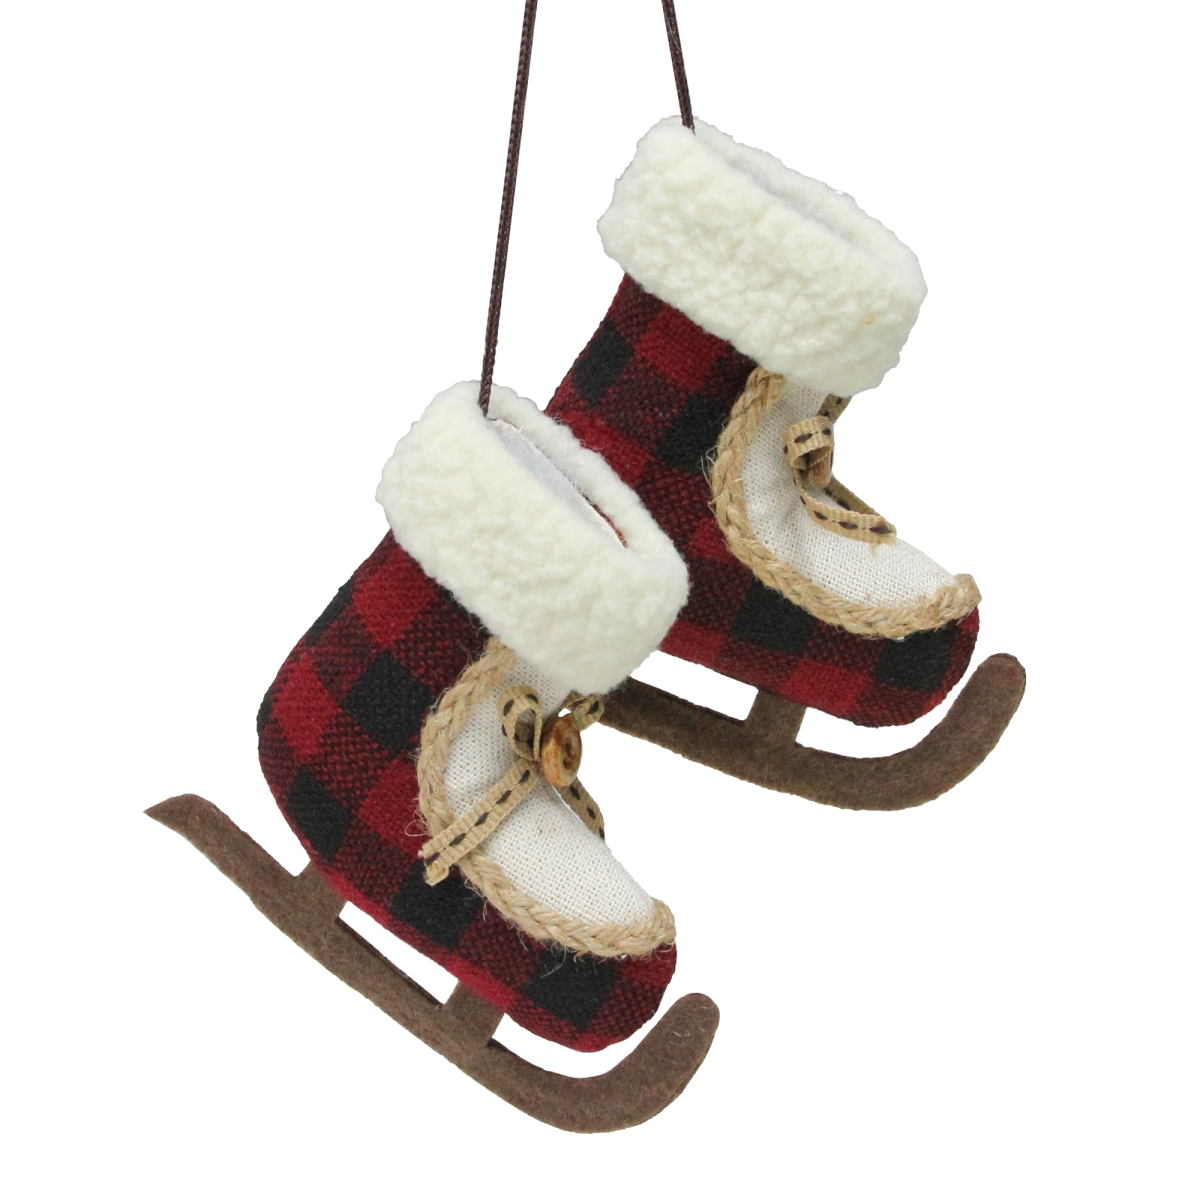 Picture of Gordon Companies 33750227 4 in. Plush Plaid Old Fashioned Ice Skates Christmas Ornament